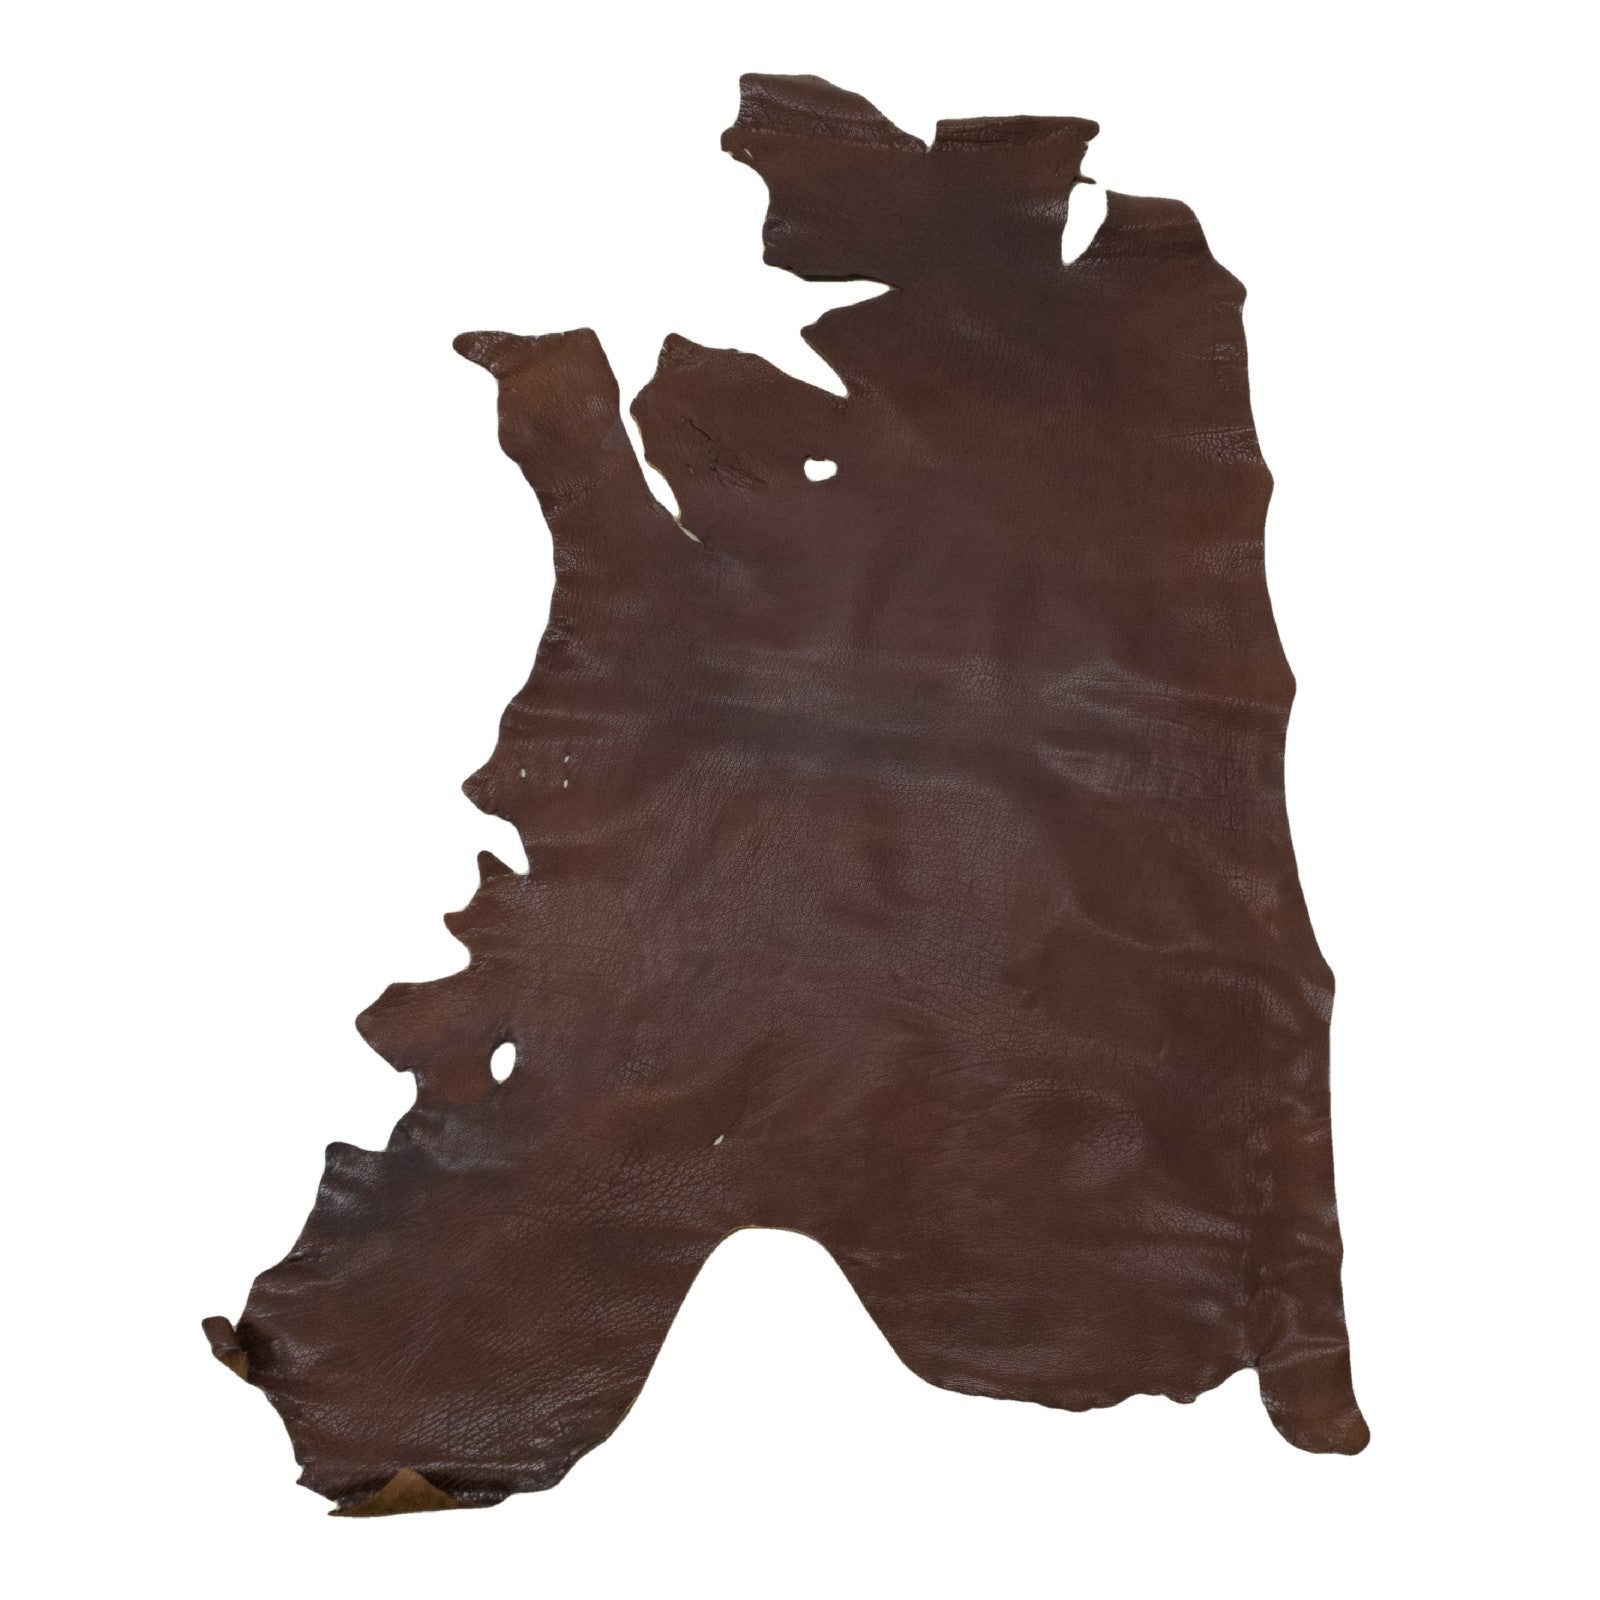 Free Roam Brown, 5-6 oz, 12-23 SqFt, Bison Sides, 15-17 Sq Ft | The Leather Guy